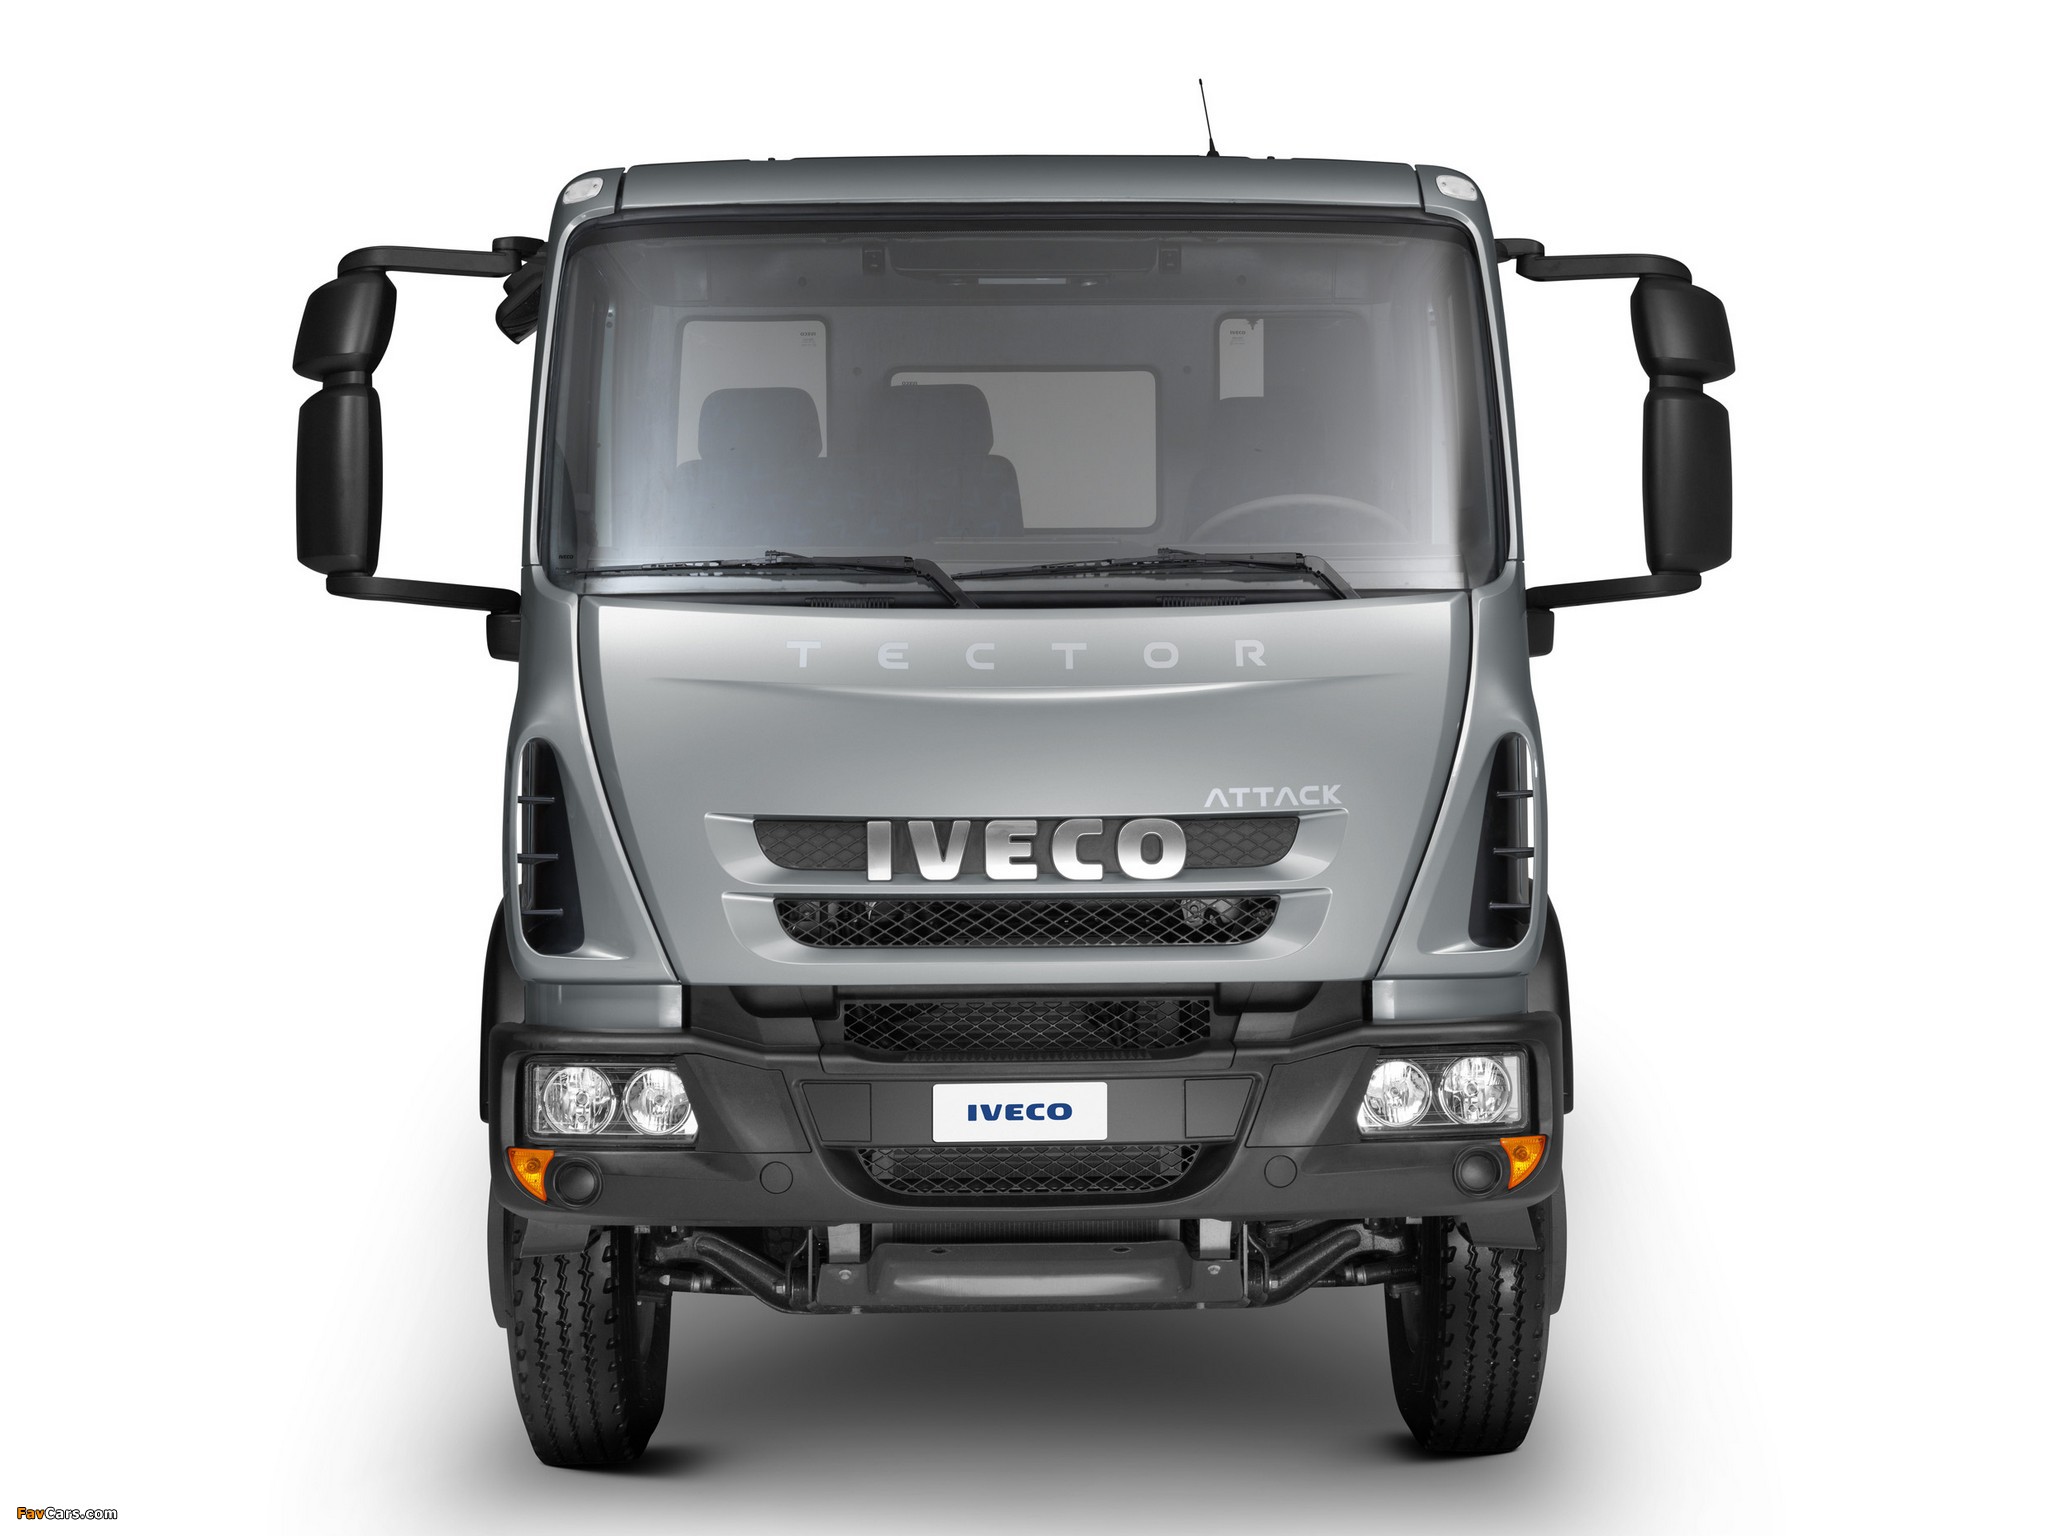 Iveco Tector Attack 4x2 2012 pictures (2048 x 1536)